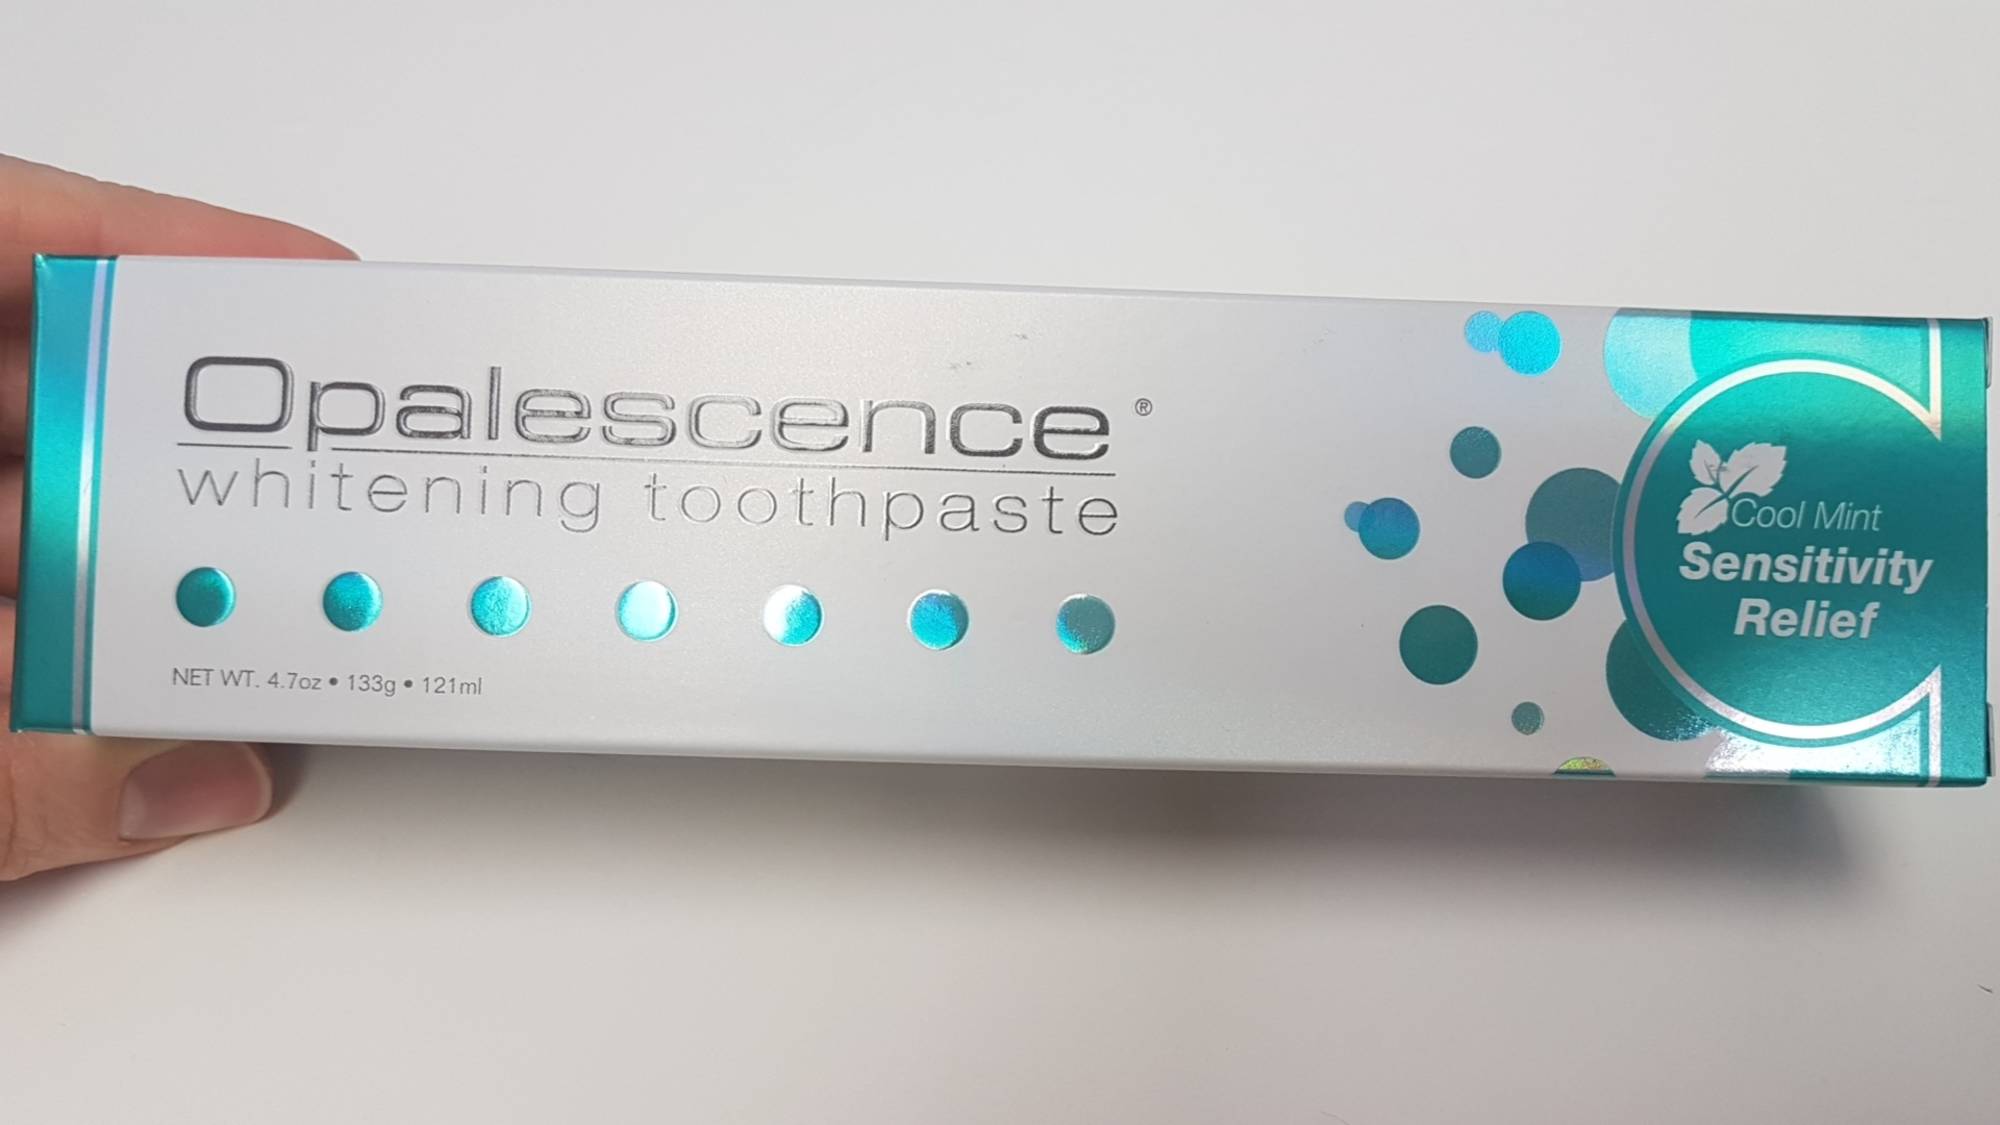 OPALESCENCE - Whitening toothpaste